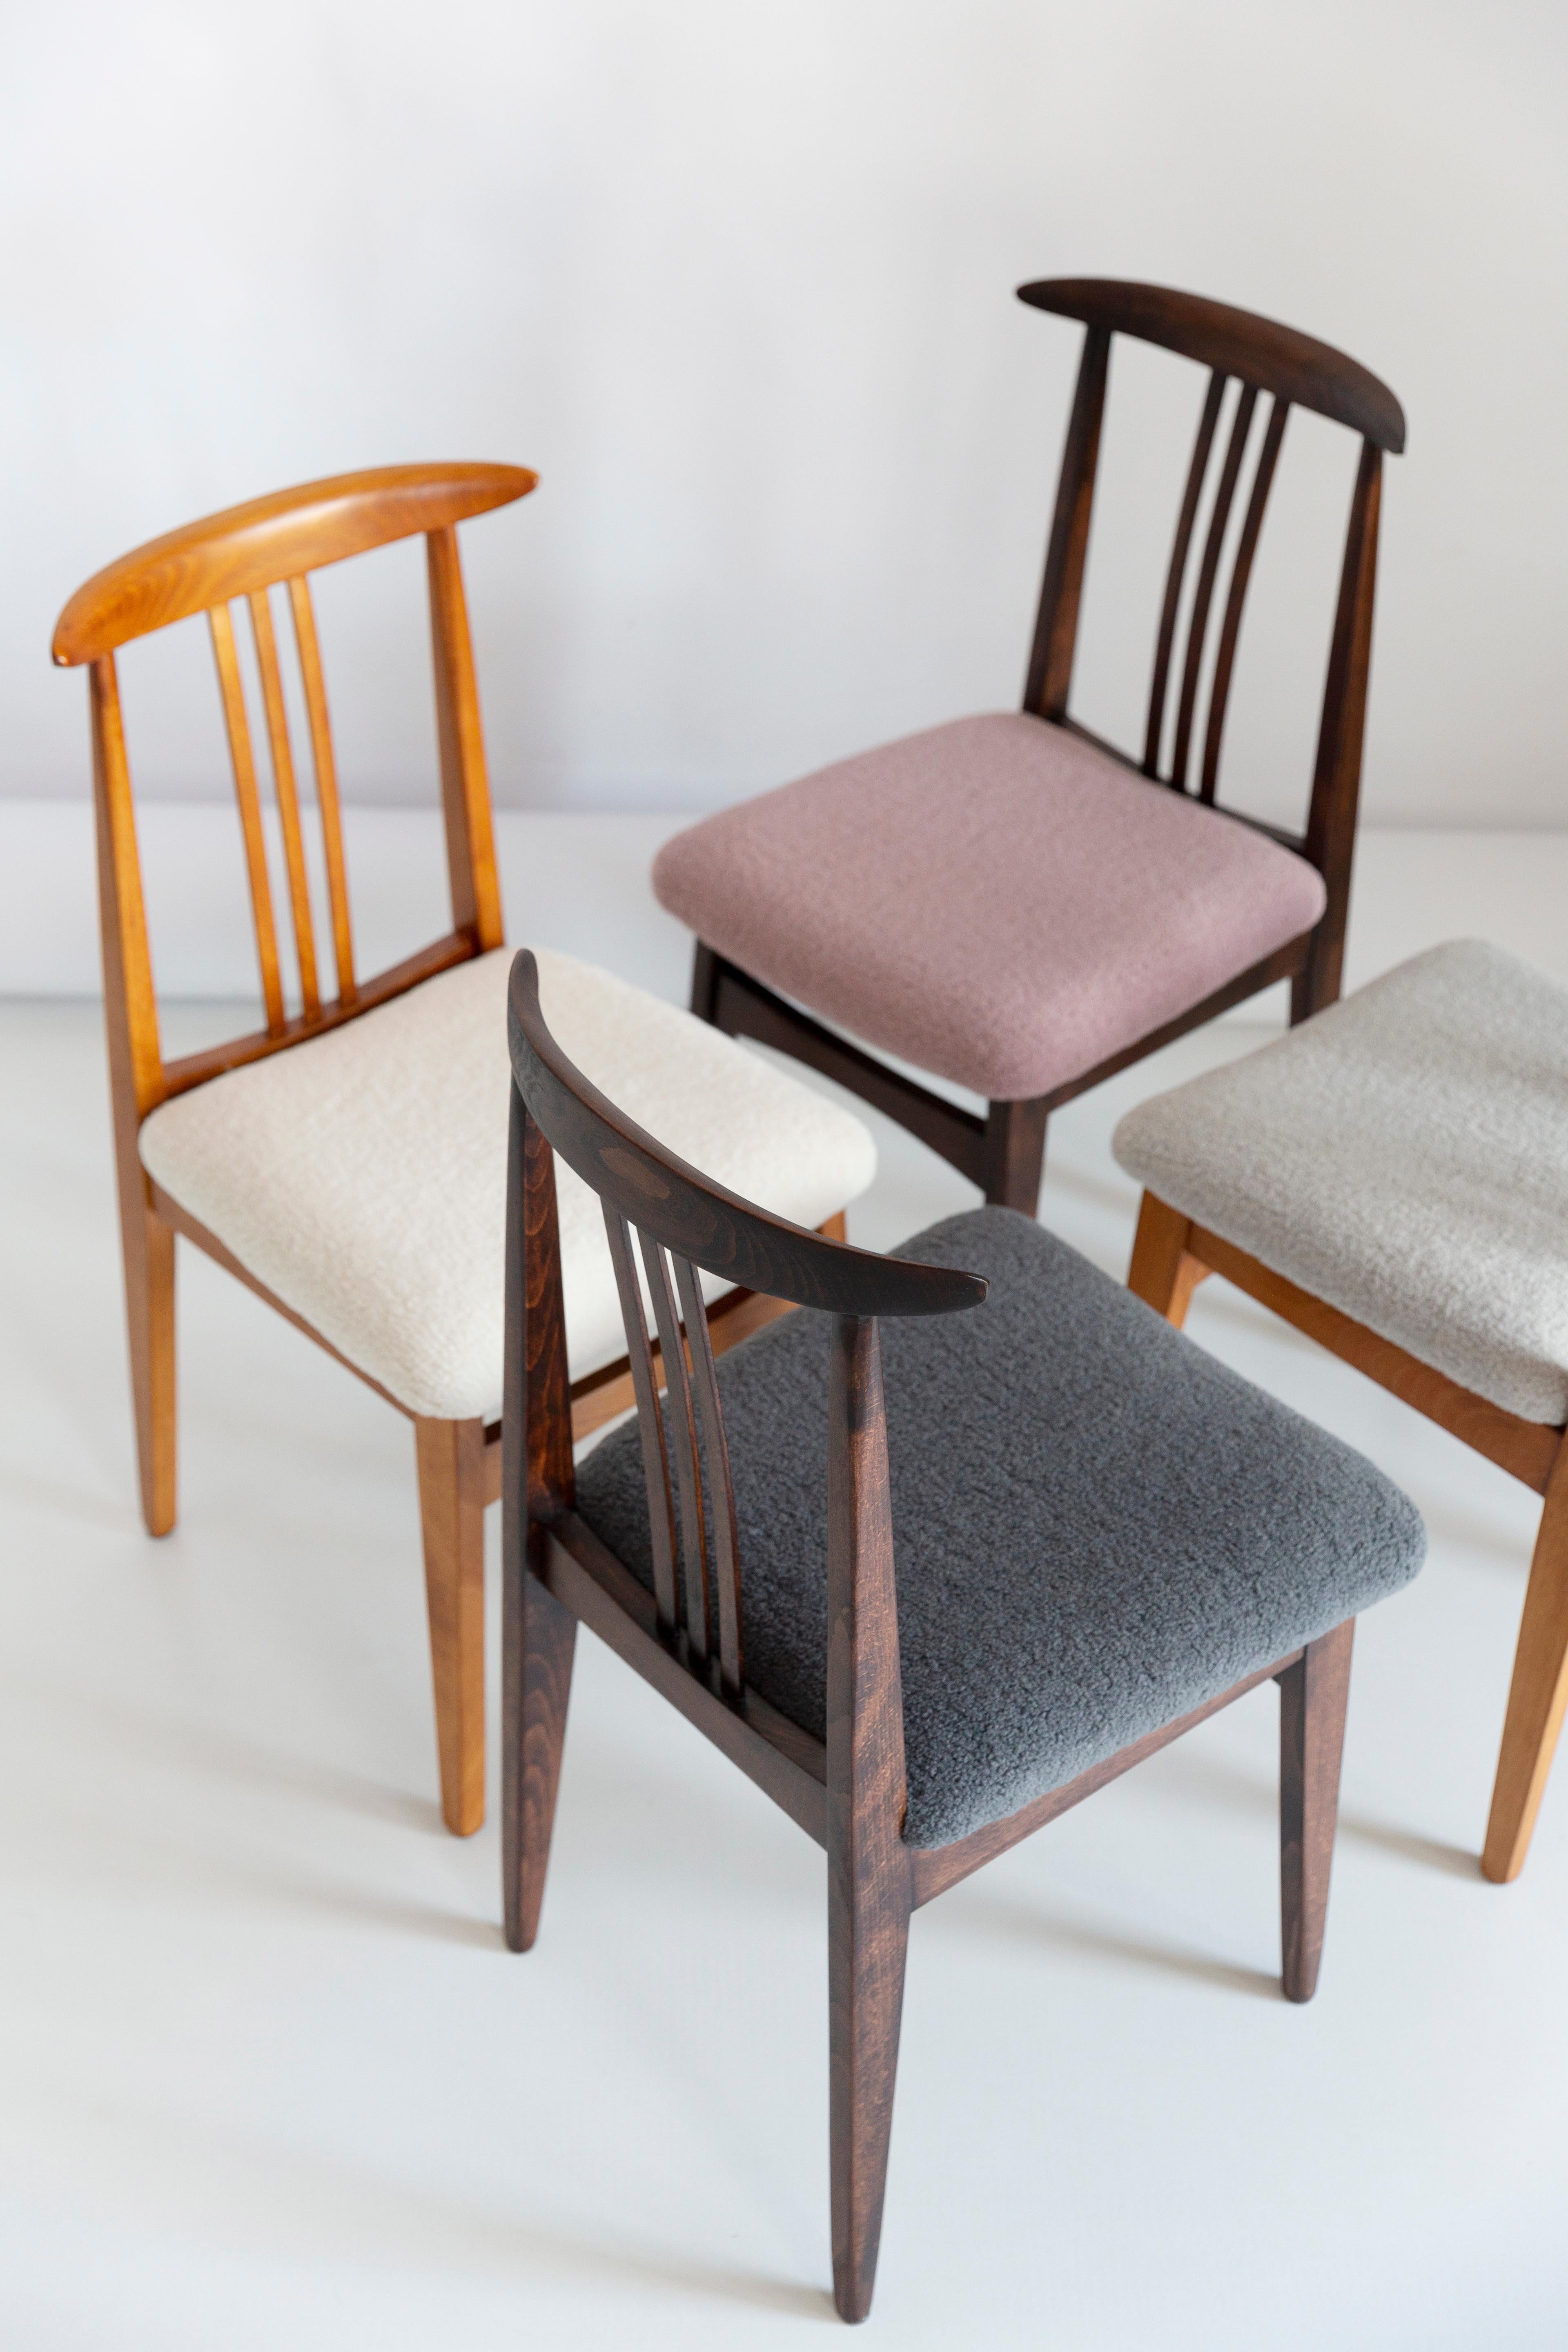 Set of six beech chairs designed by M. Zielinski, type 200 / 100B. Manufactured by the Opole Furniture Industry Center at the end of the 1960s in Poland. The chairs have undergone a complete carpentry and upholstery renovation. Wood is cleaned and